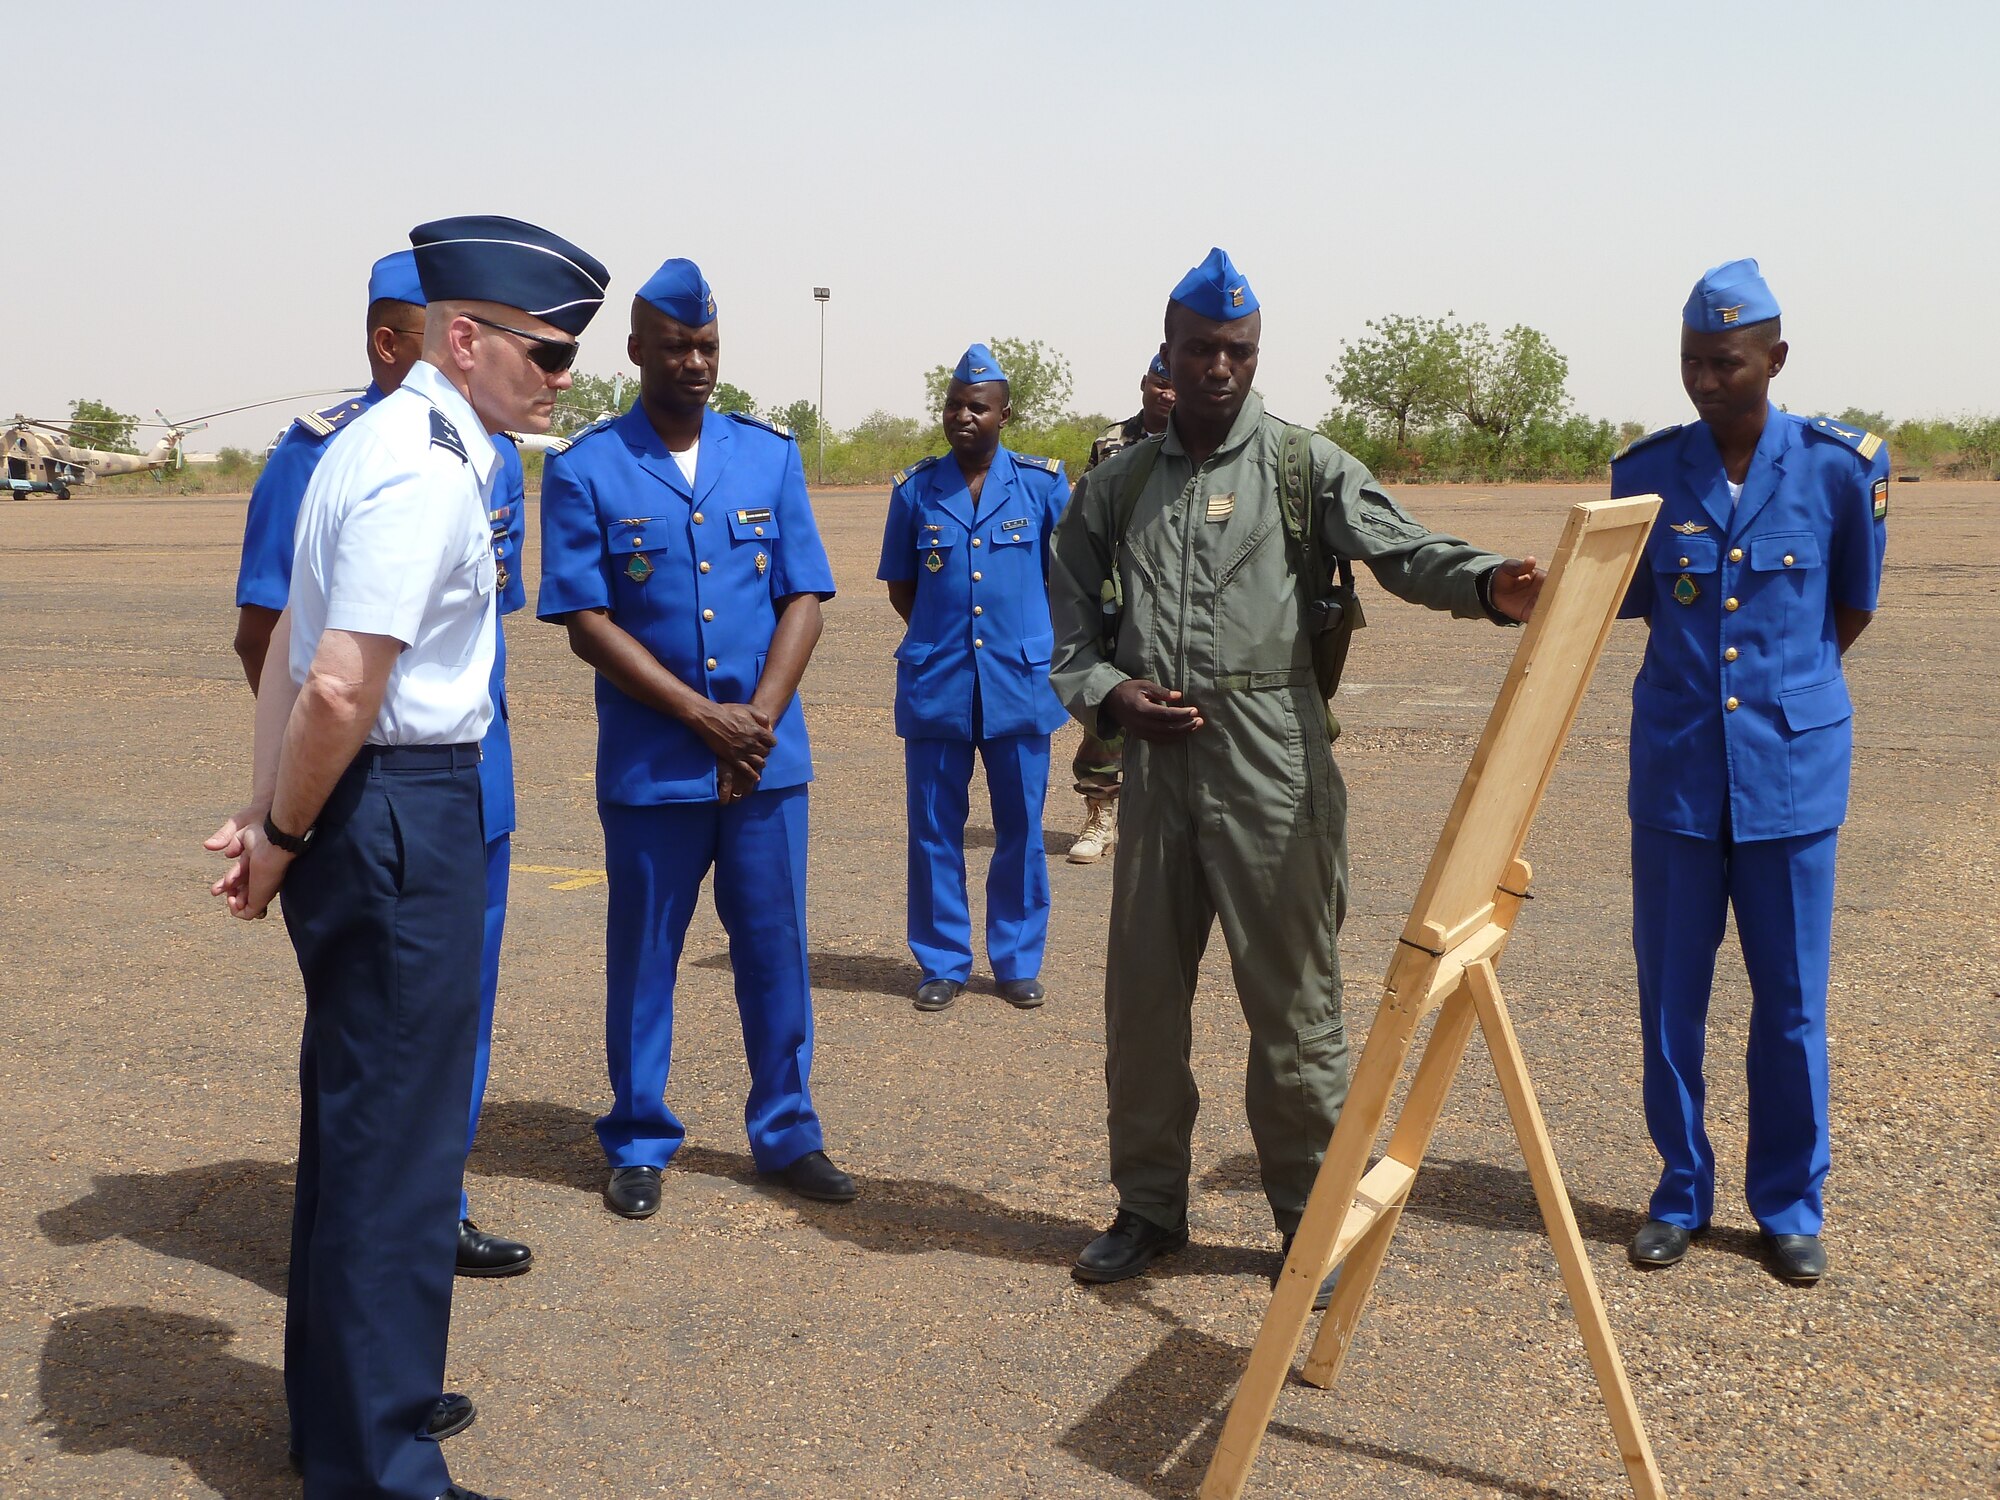 U.S. Air Force Maj. Gen. Carlton D. Everhart II, 3rd Air Force vice commander, receives a mission brief on Nigerien aircraft by members of the Nigerien air force at Base Aerienne 101, Niamey, Niger, April 29, 2013. Everhart visited with Nigerien senior military leaders and airmen to exchange techniques and ideas on
strengthening partnership capacities between the two air forces. (U.S. Air Force photo by Capt. Reba Good/Released)
